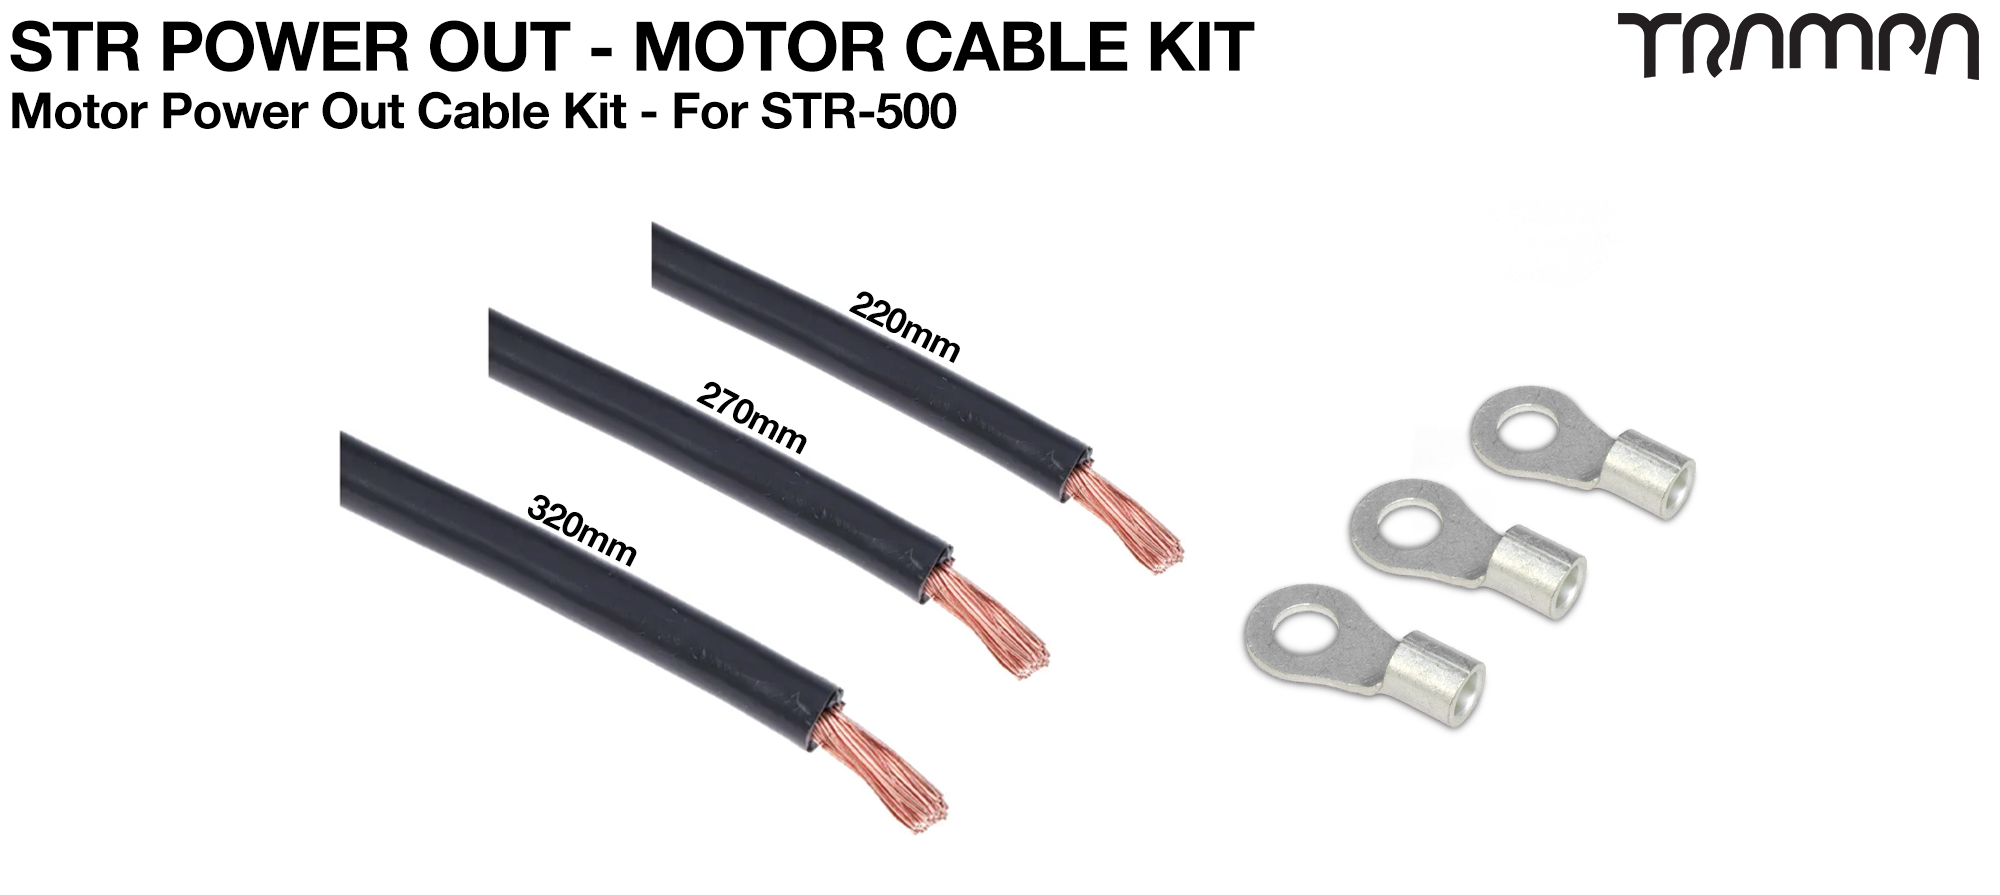 STR Power out - Motor Cable Kit